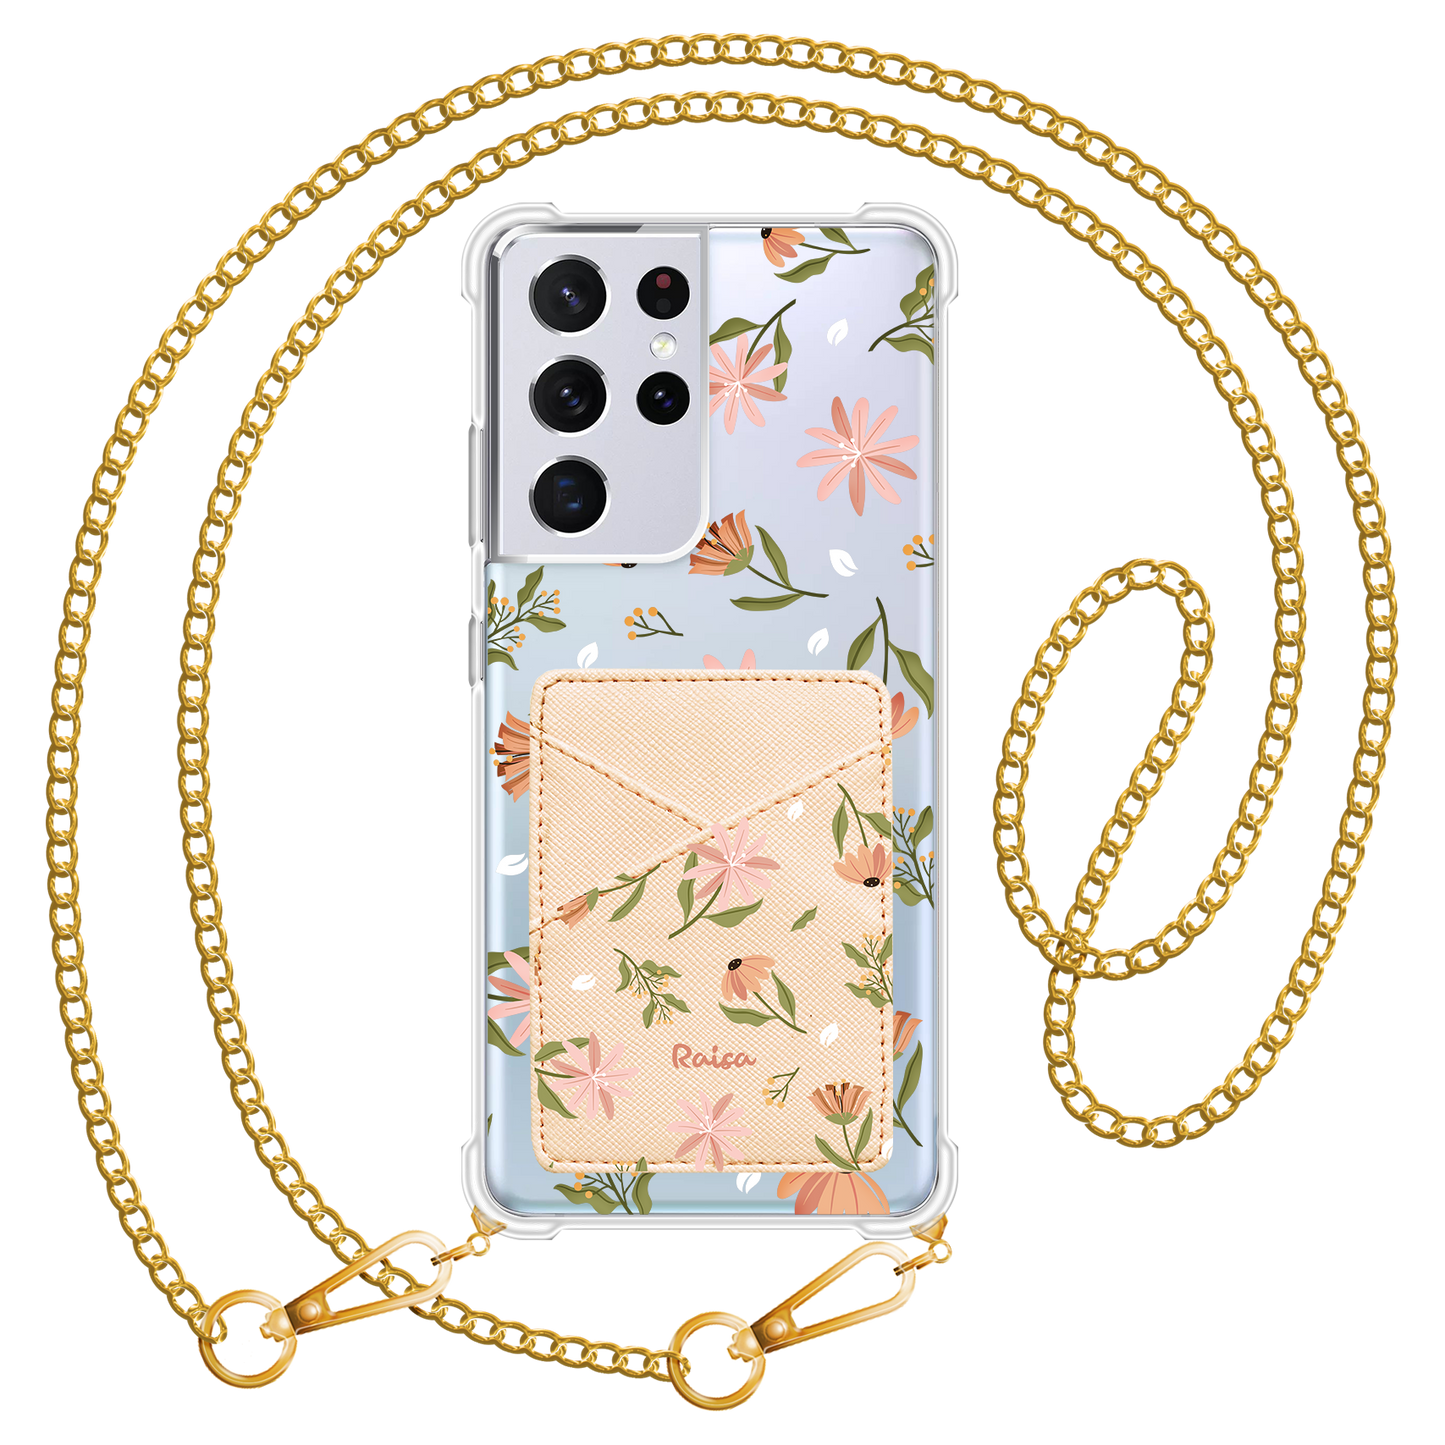 Android Phone Wallet Case - Cosmos Flower